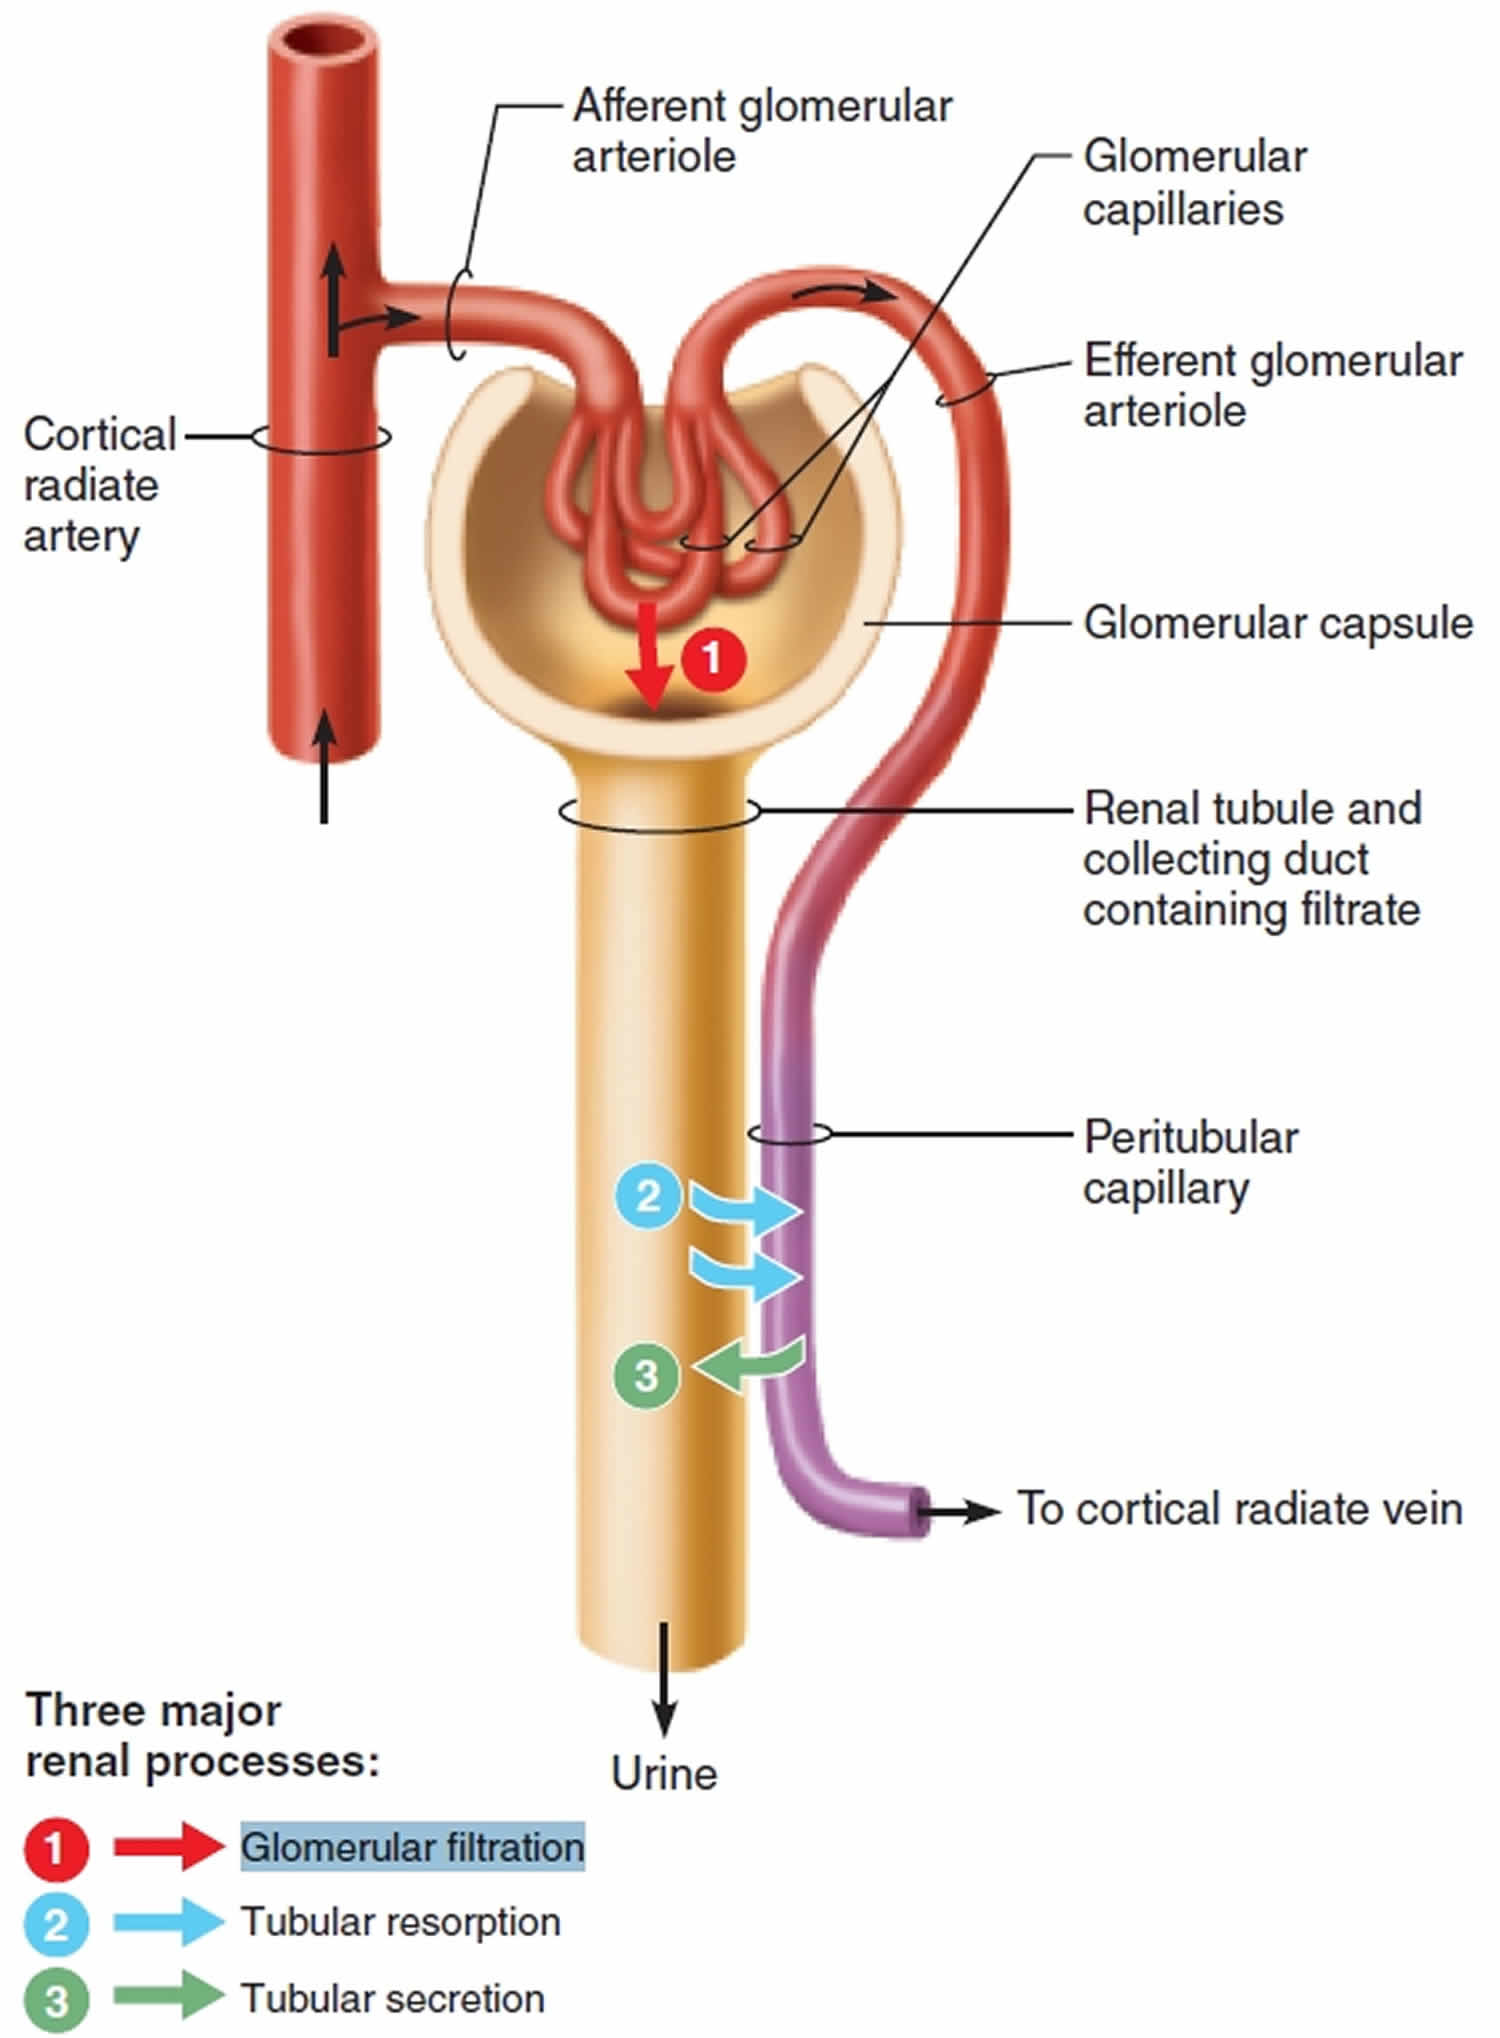 What Is The Process Of Filtration In The Kidney